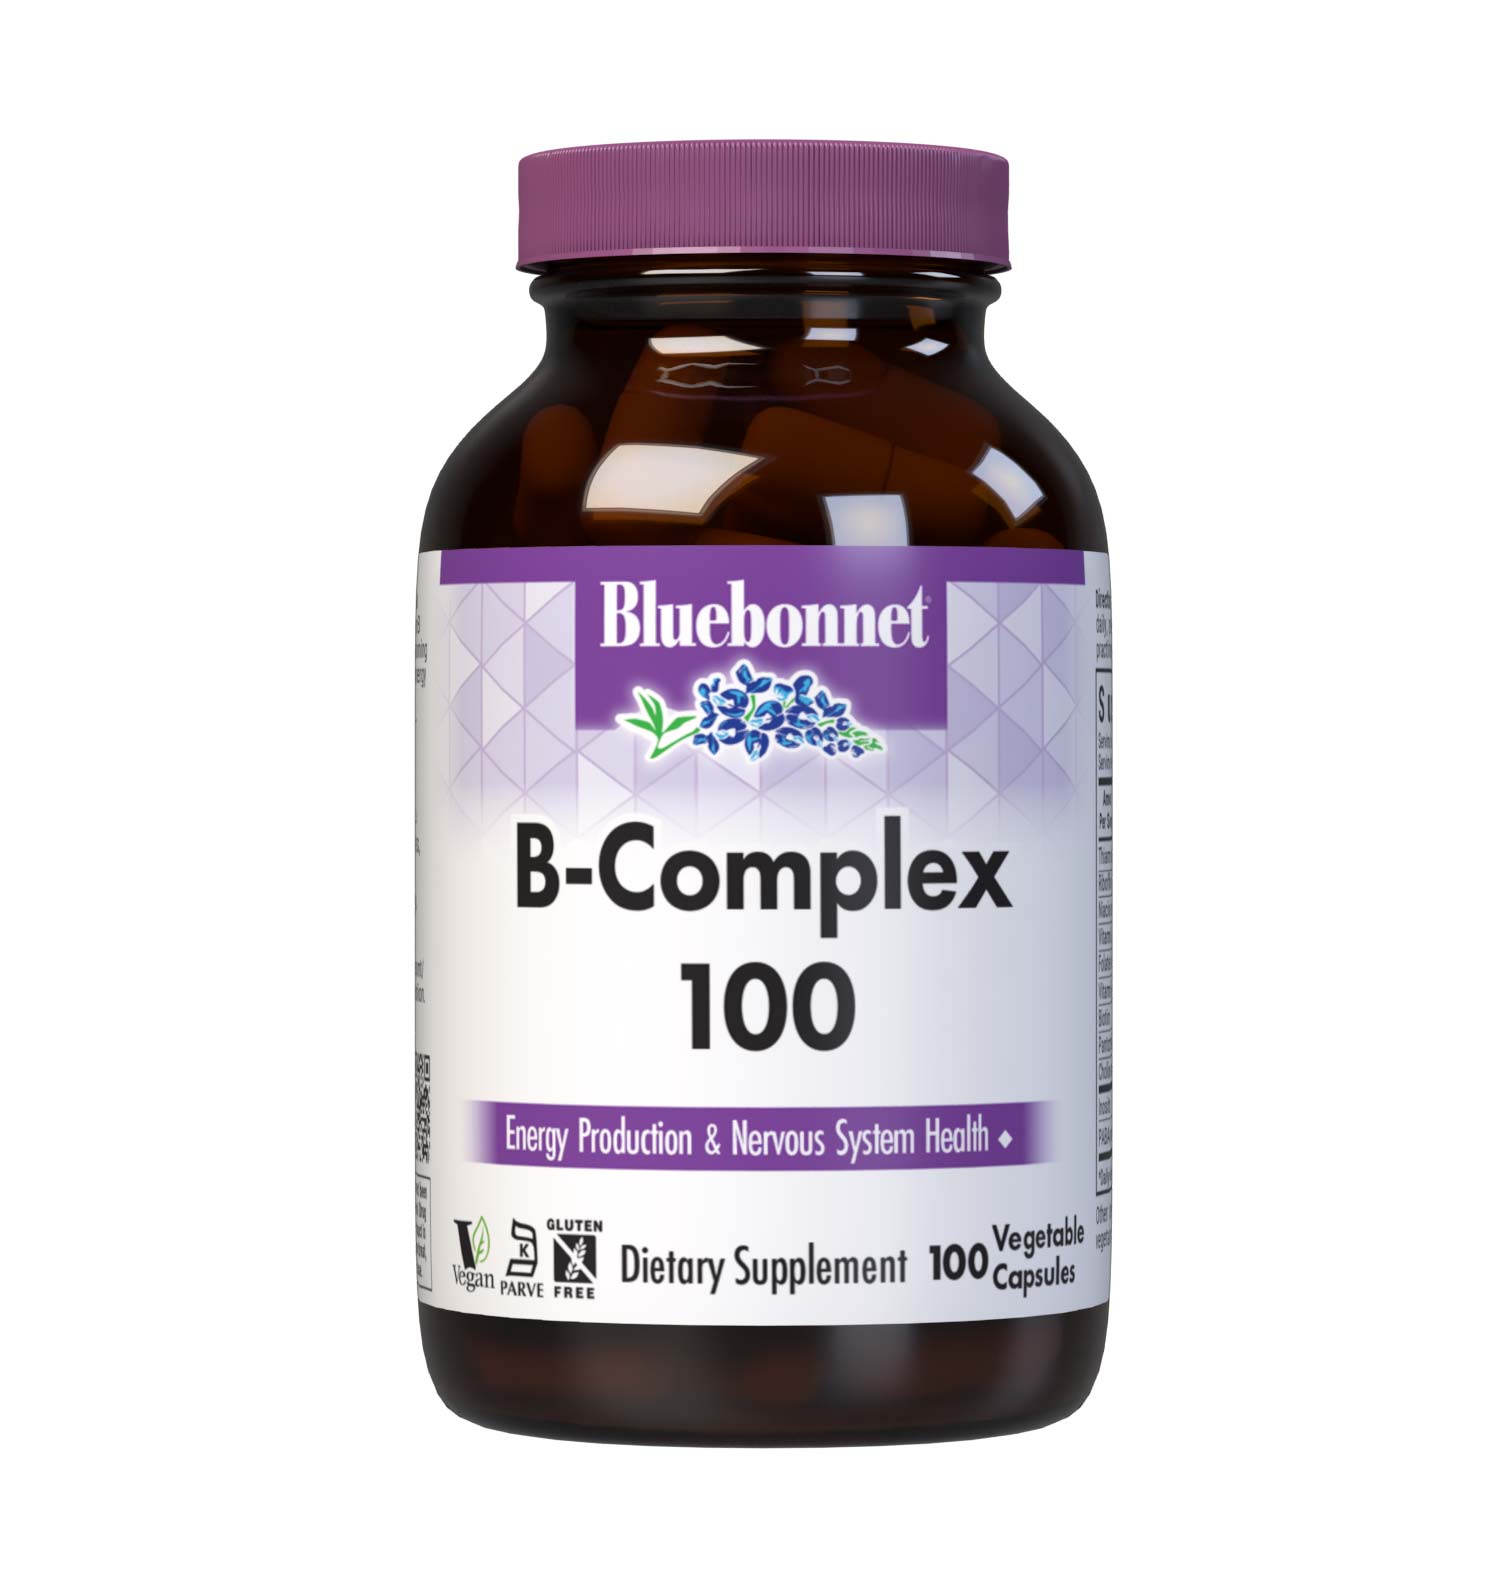 Bluebonnet’s B-Complex 100 Vegetable Capsules are formulated with a full spectrum of high potency B vitamins which play a complementary role in maintaining physiologic and metabolic functions that support energy production and nervous system health. #size_100 count